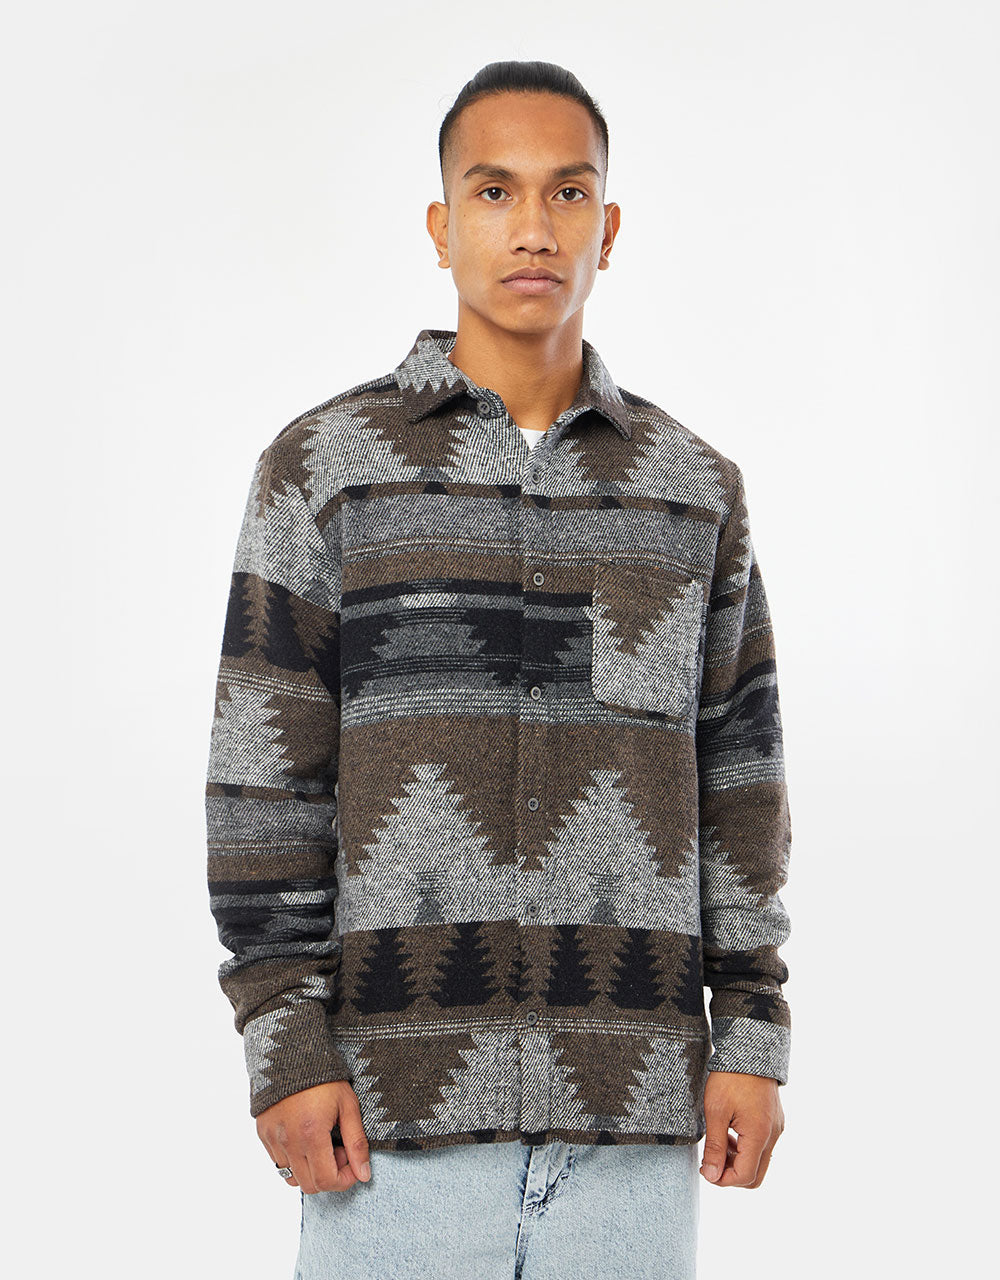 Route One Navajo Heavyweight Flannel Shirt - Charcoal